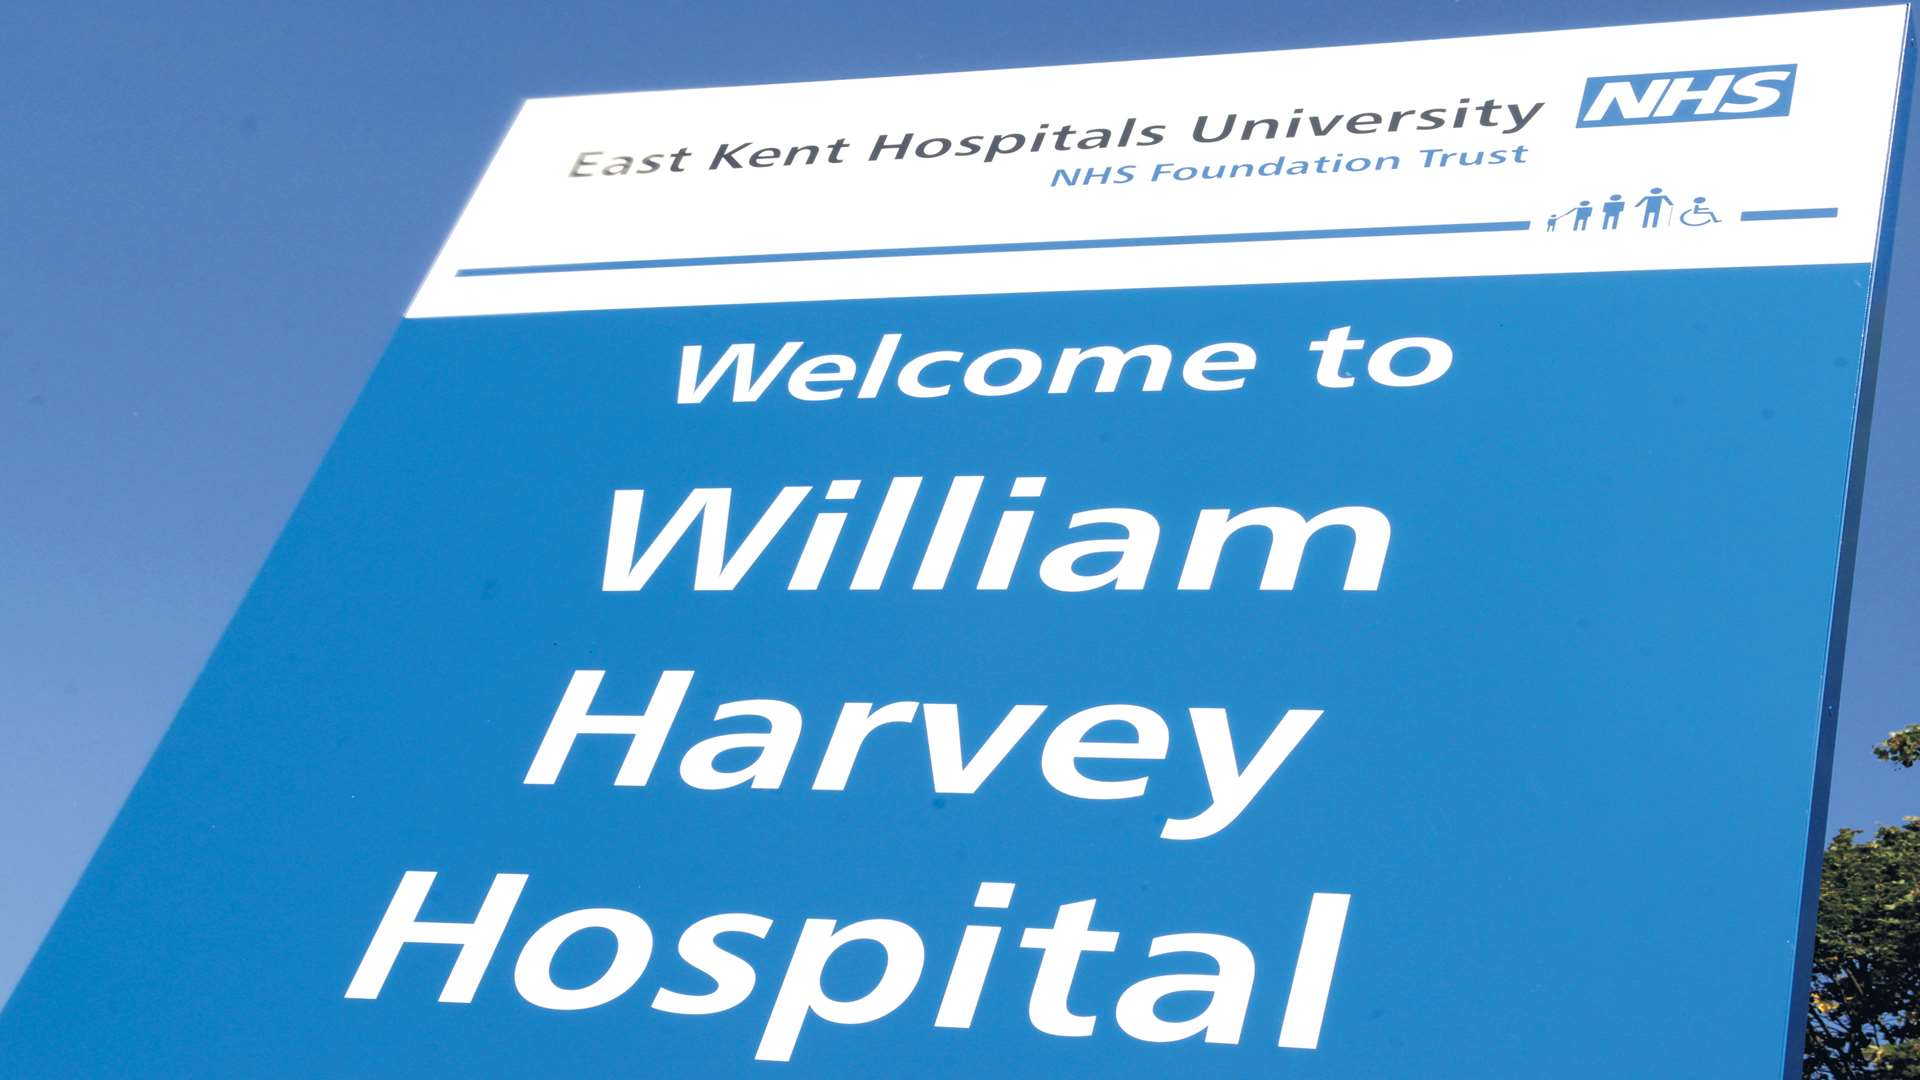 Five patients fell and died at William Harvey Hospital in Ashford within four months